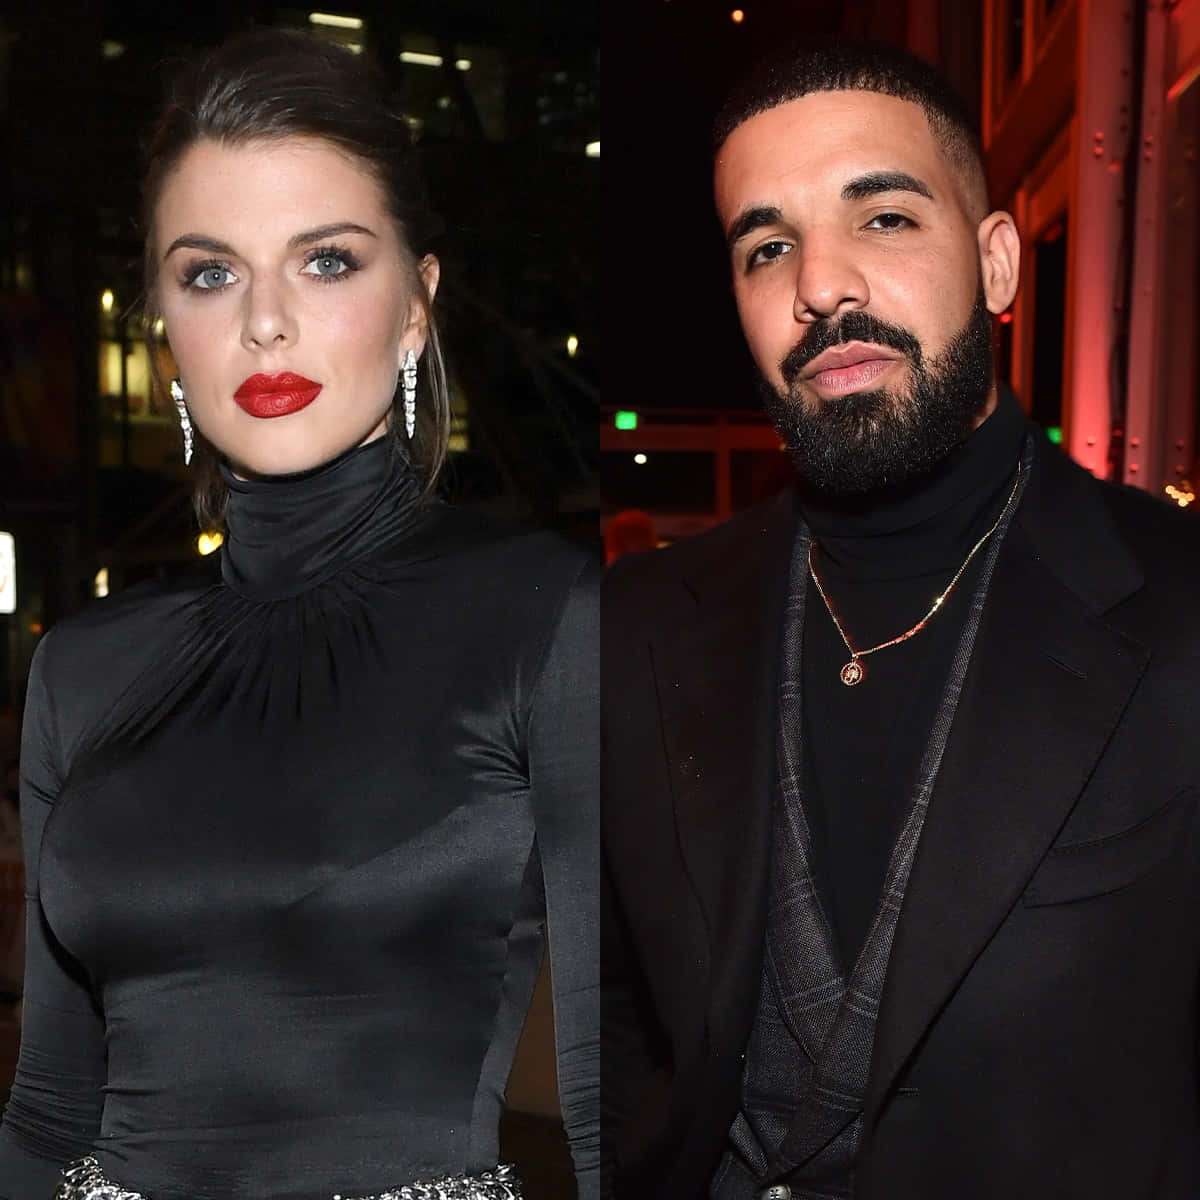 Drake And A Woman In Black And Red